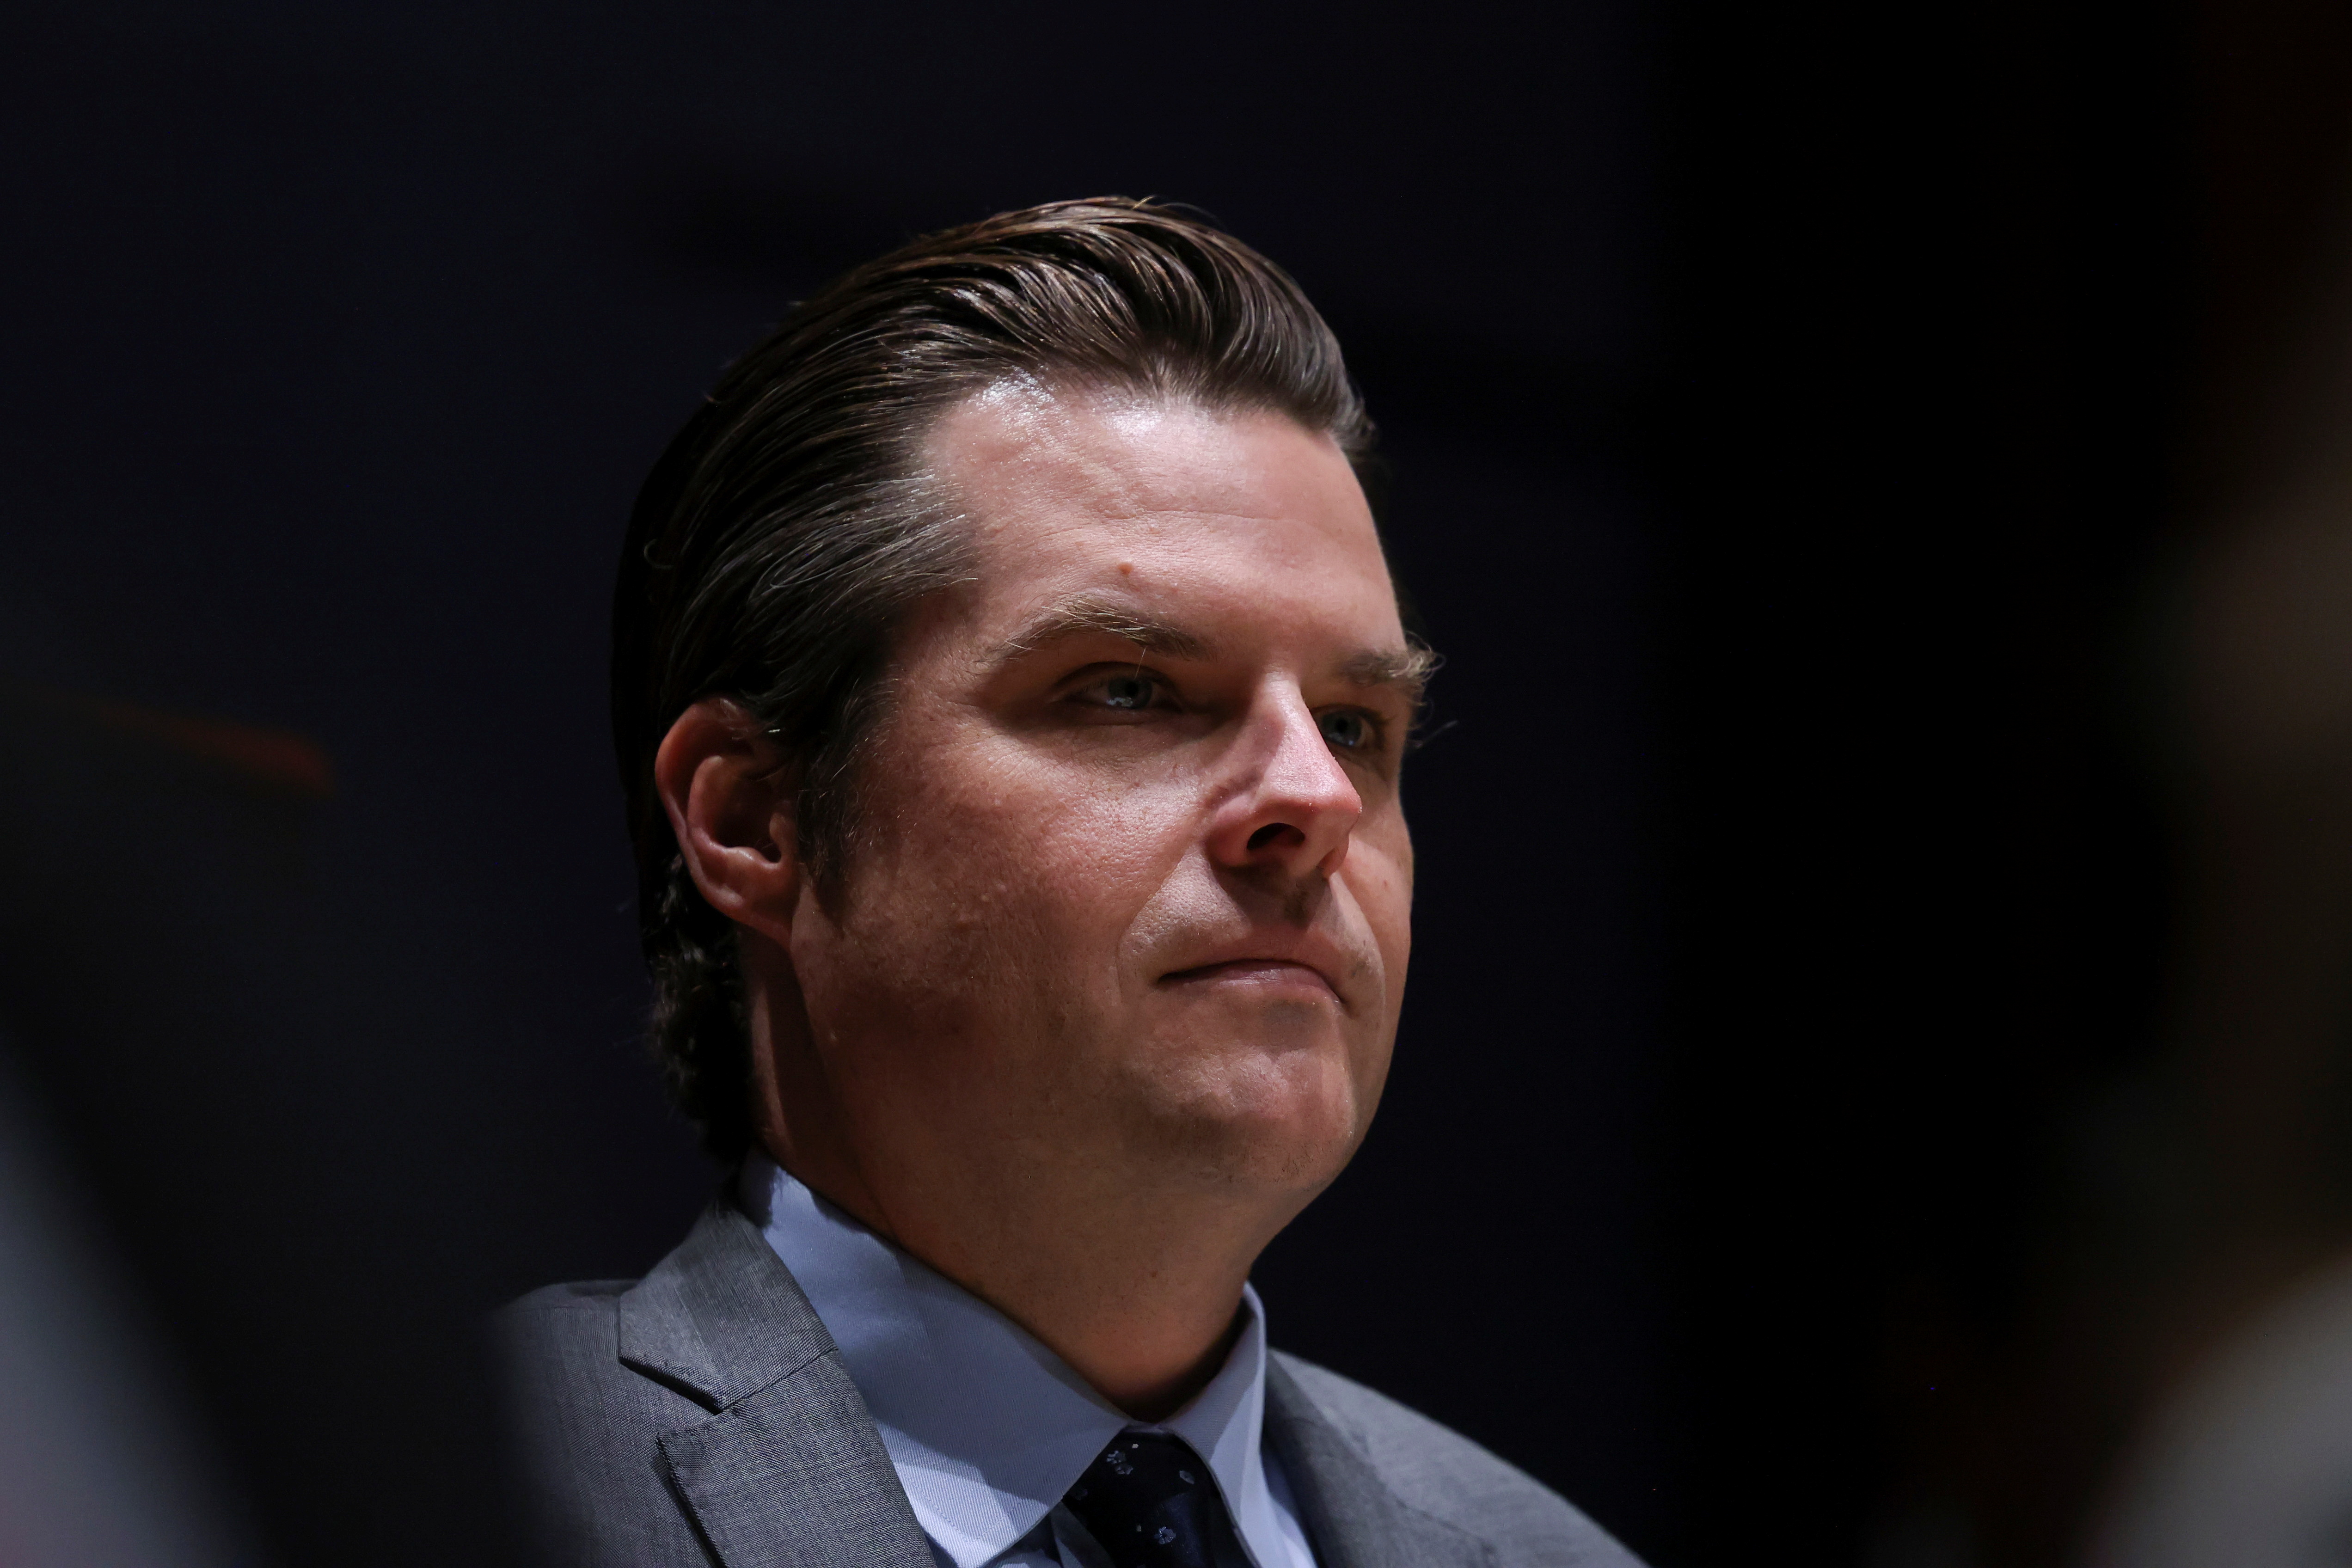 Rep Gaetz listens as FBI Director Christopher Wray testifies before the House Judiciary Committee on Capitol Hill in Washington